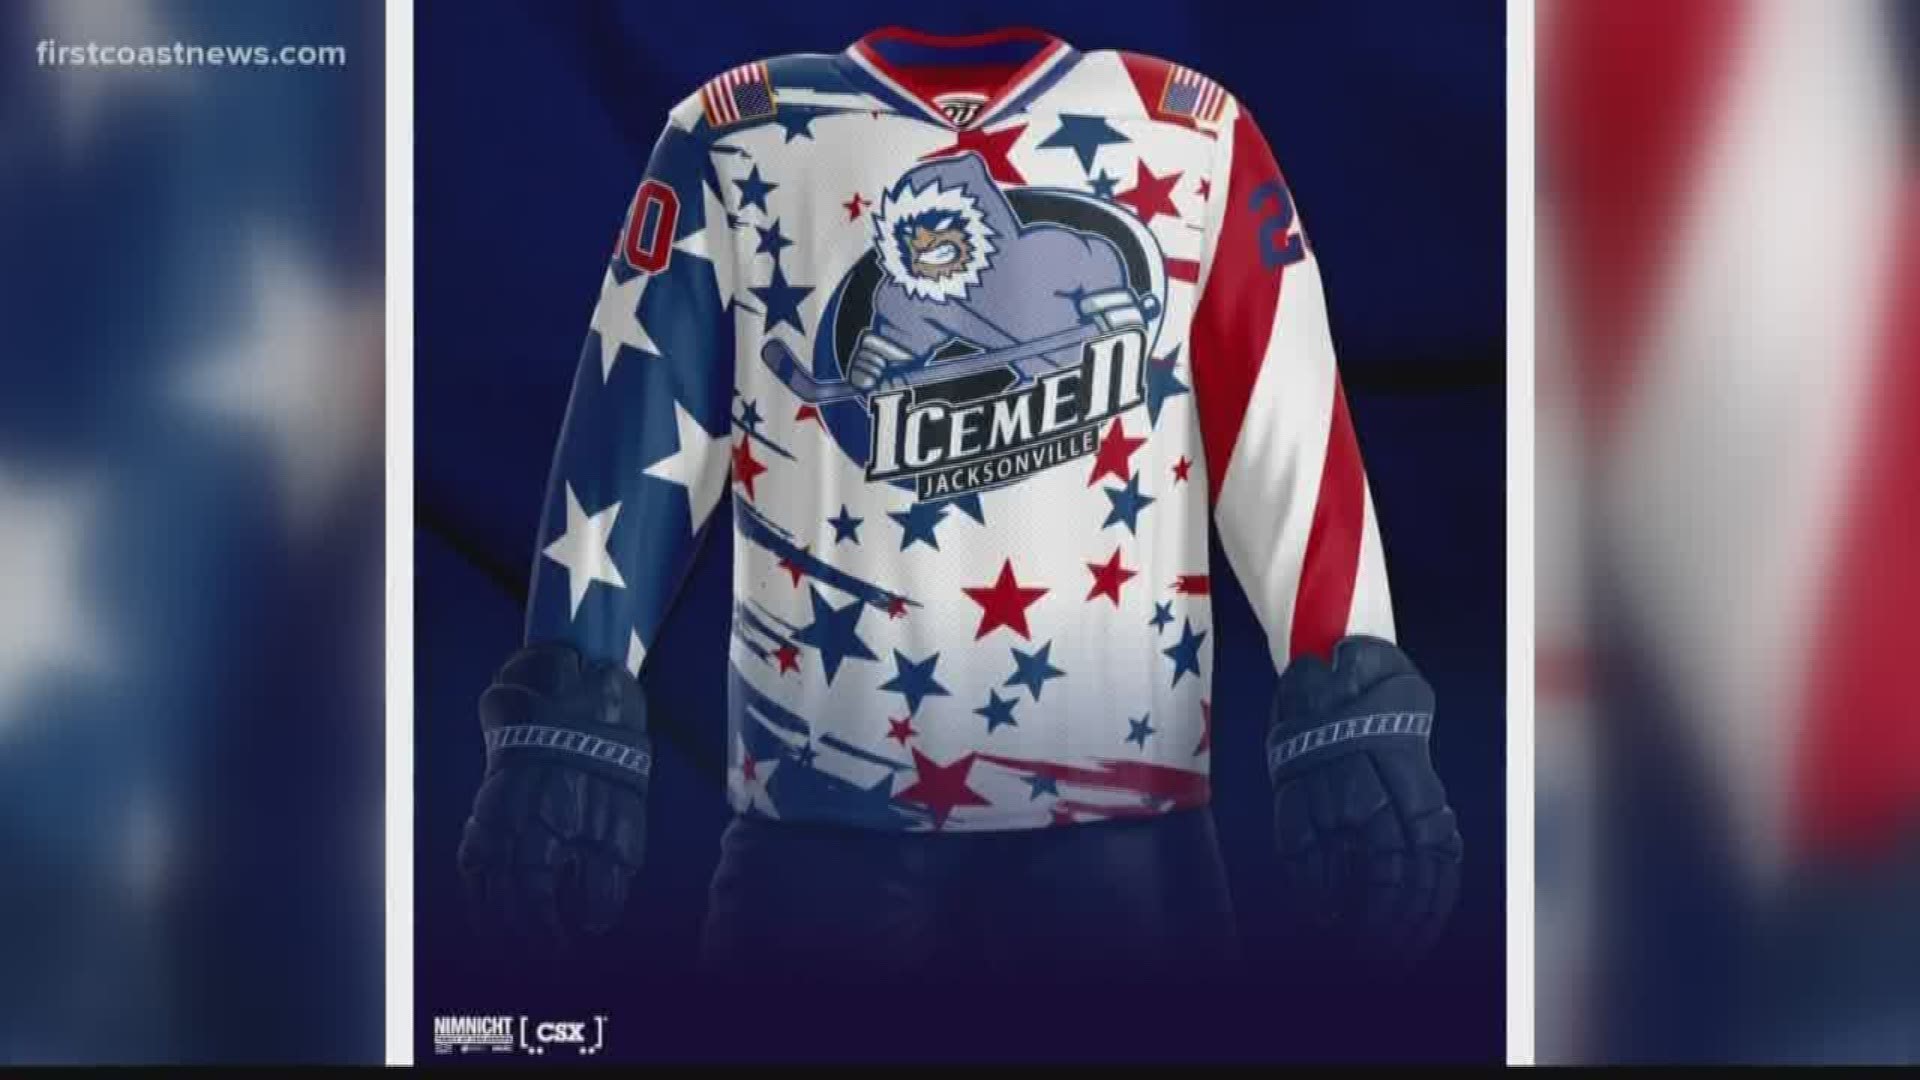 The Jacksonville Icemen will honor veterans and those who are currently serving our country as they host Orlando.